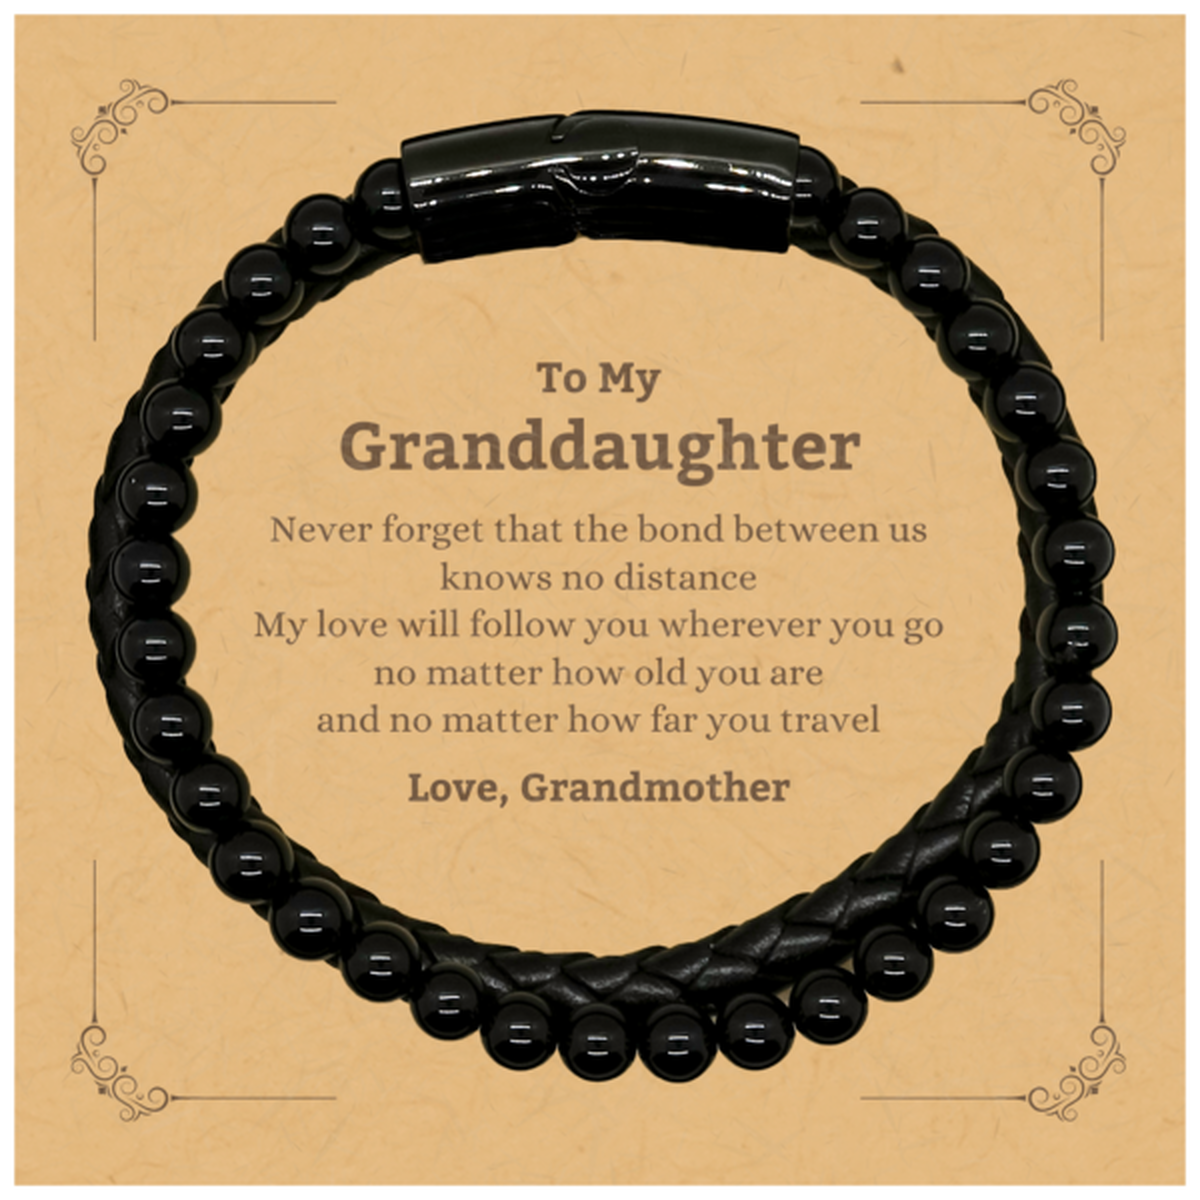 Granddaughter Birthday Gifts from Grandmother, Adjustable Stone Leather Bracelets for Granddaughter Christmas Graduation Unique Gifts Granddaughter Never forget that the bond between us knows no distance. Love, Grandmother